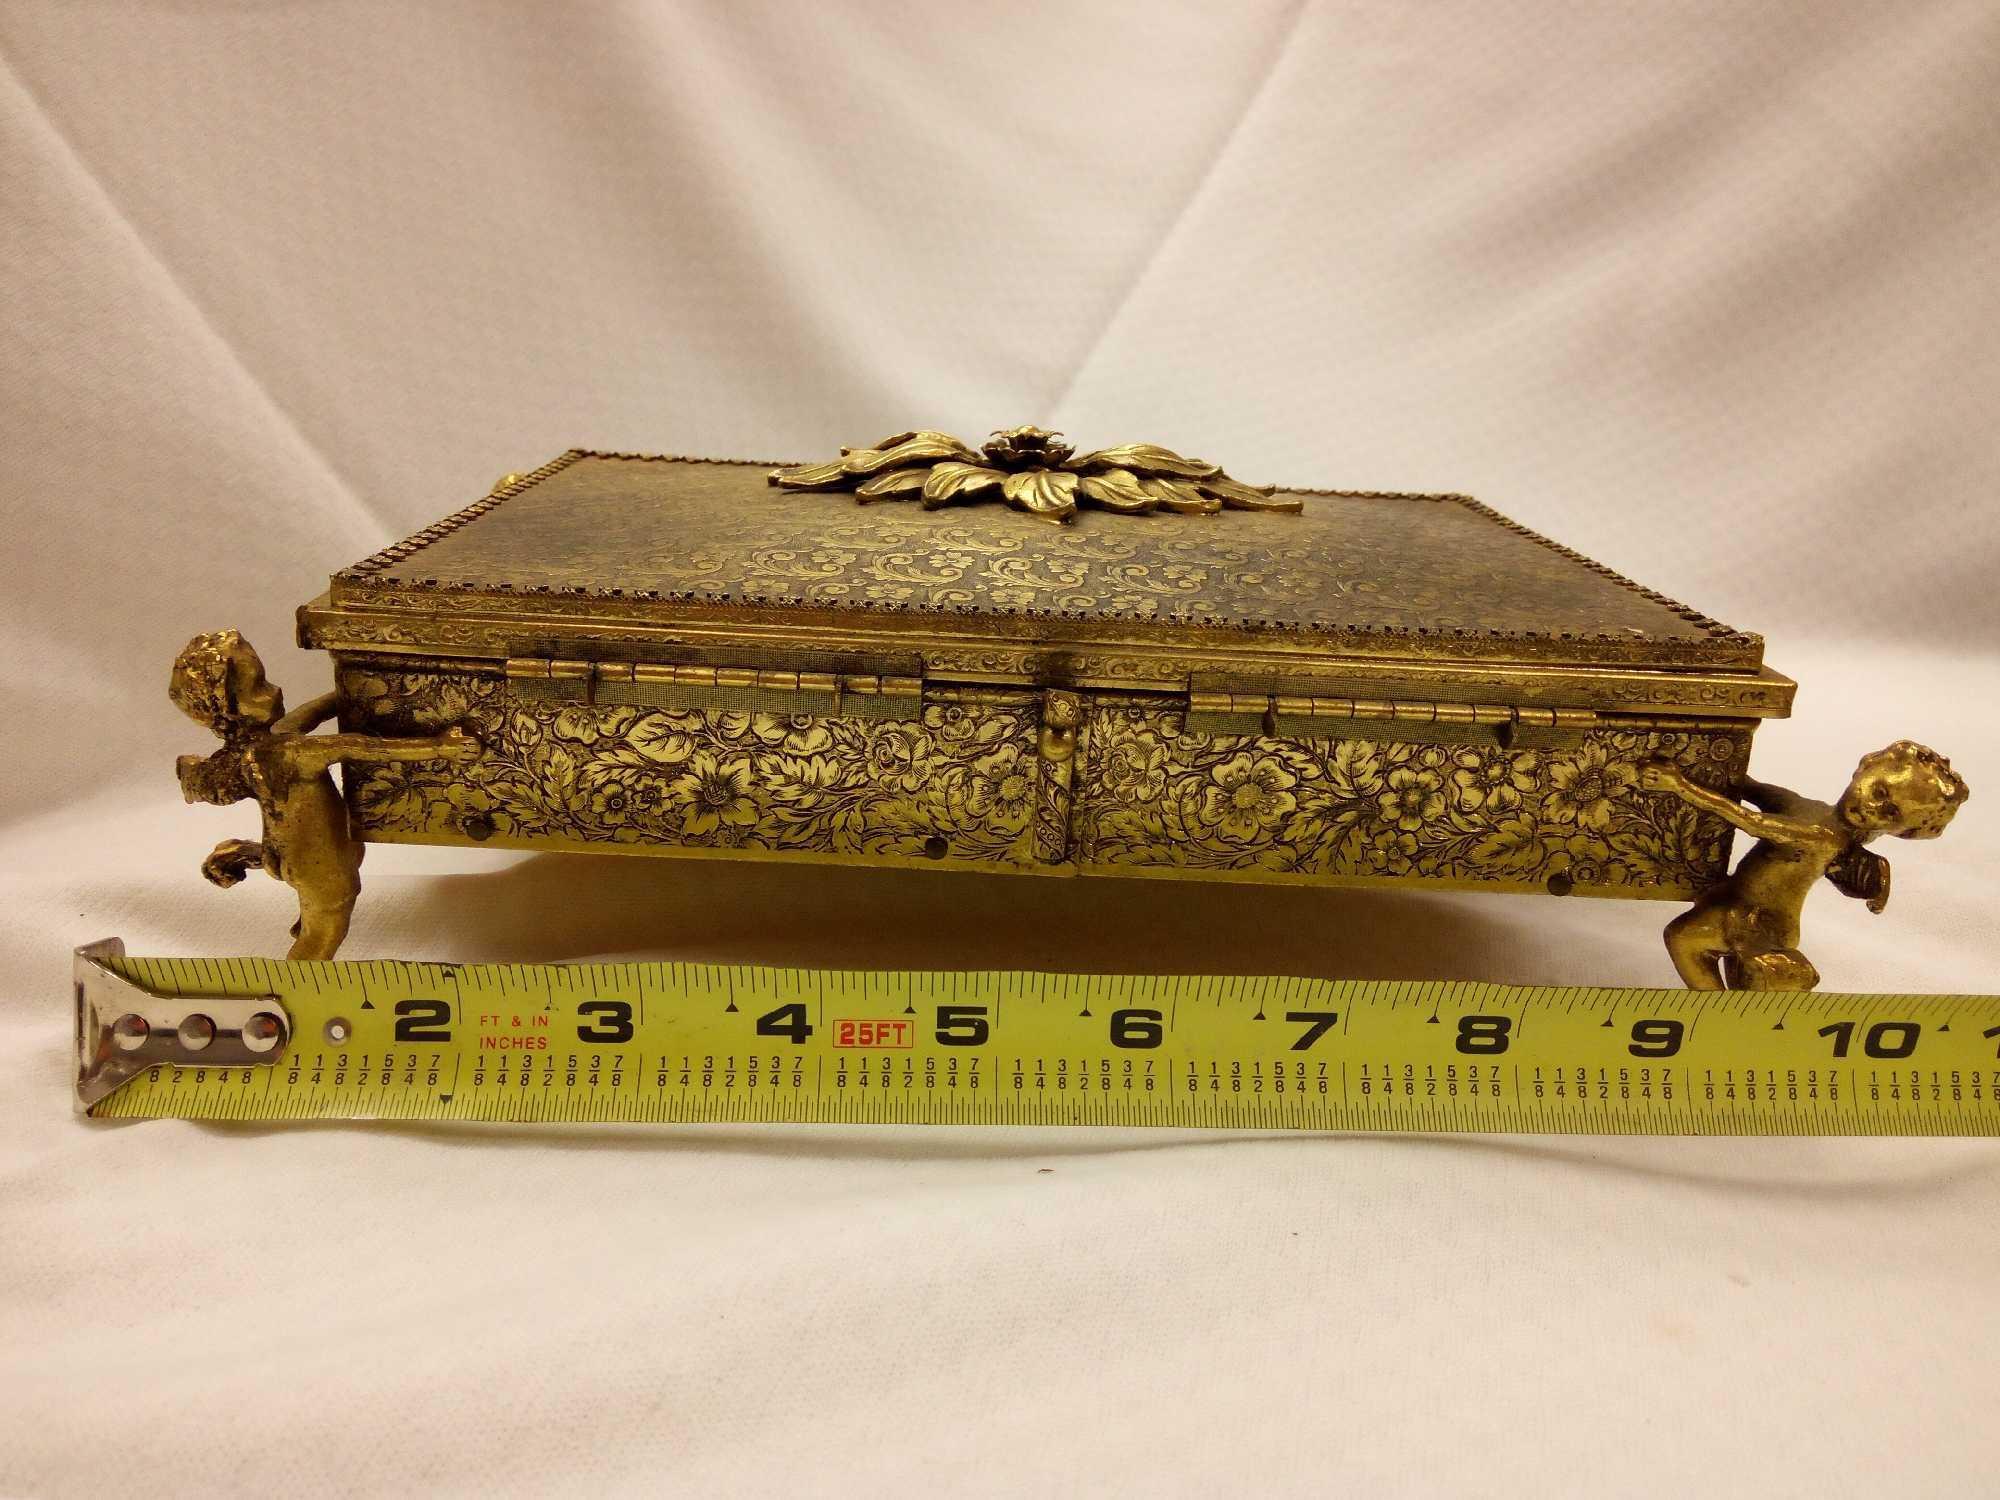 ANTIQUE GOLDEN METAL MIRRORED JEWELRY BOX WITH FLANKING CHERUBS